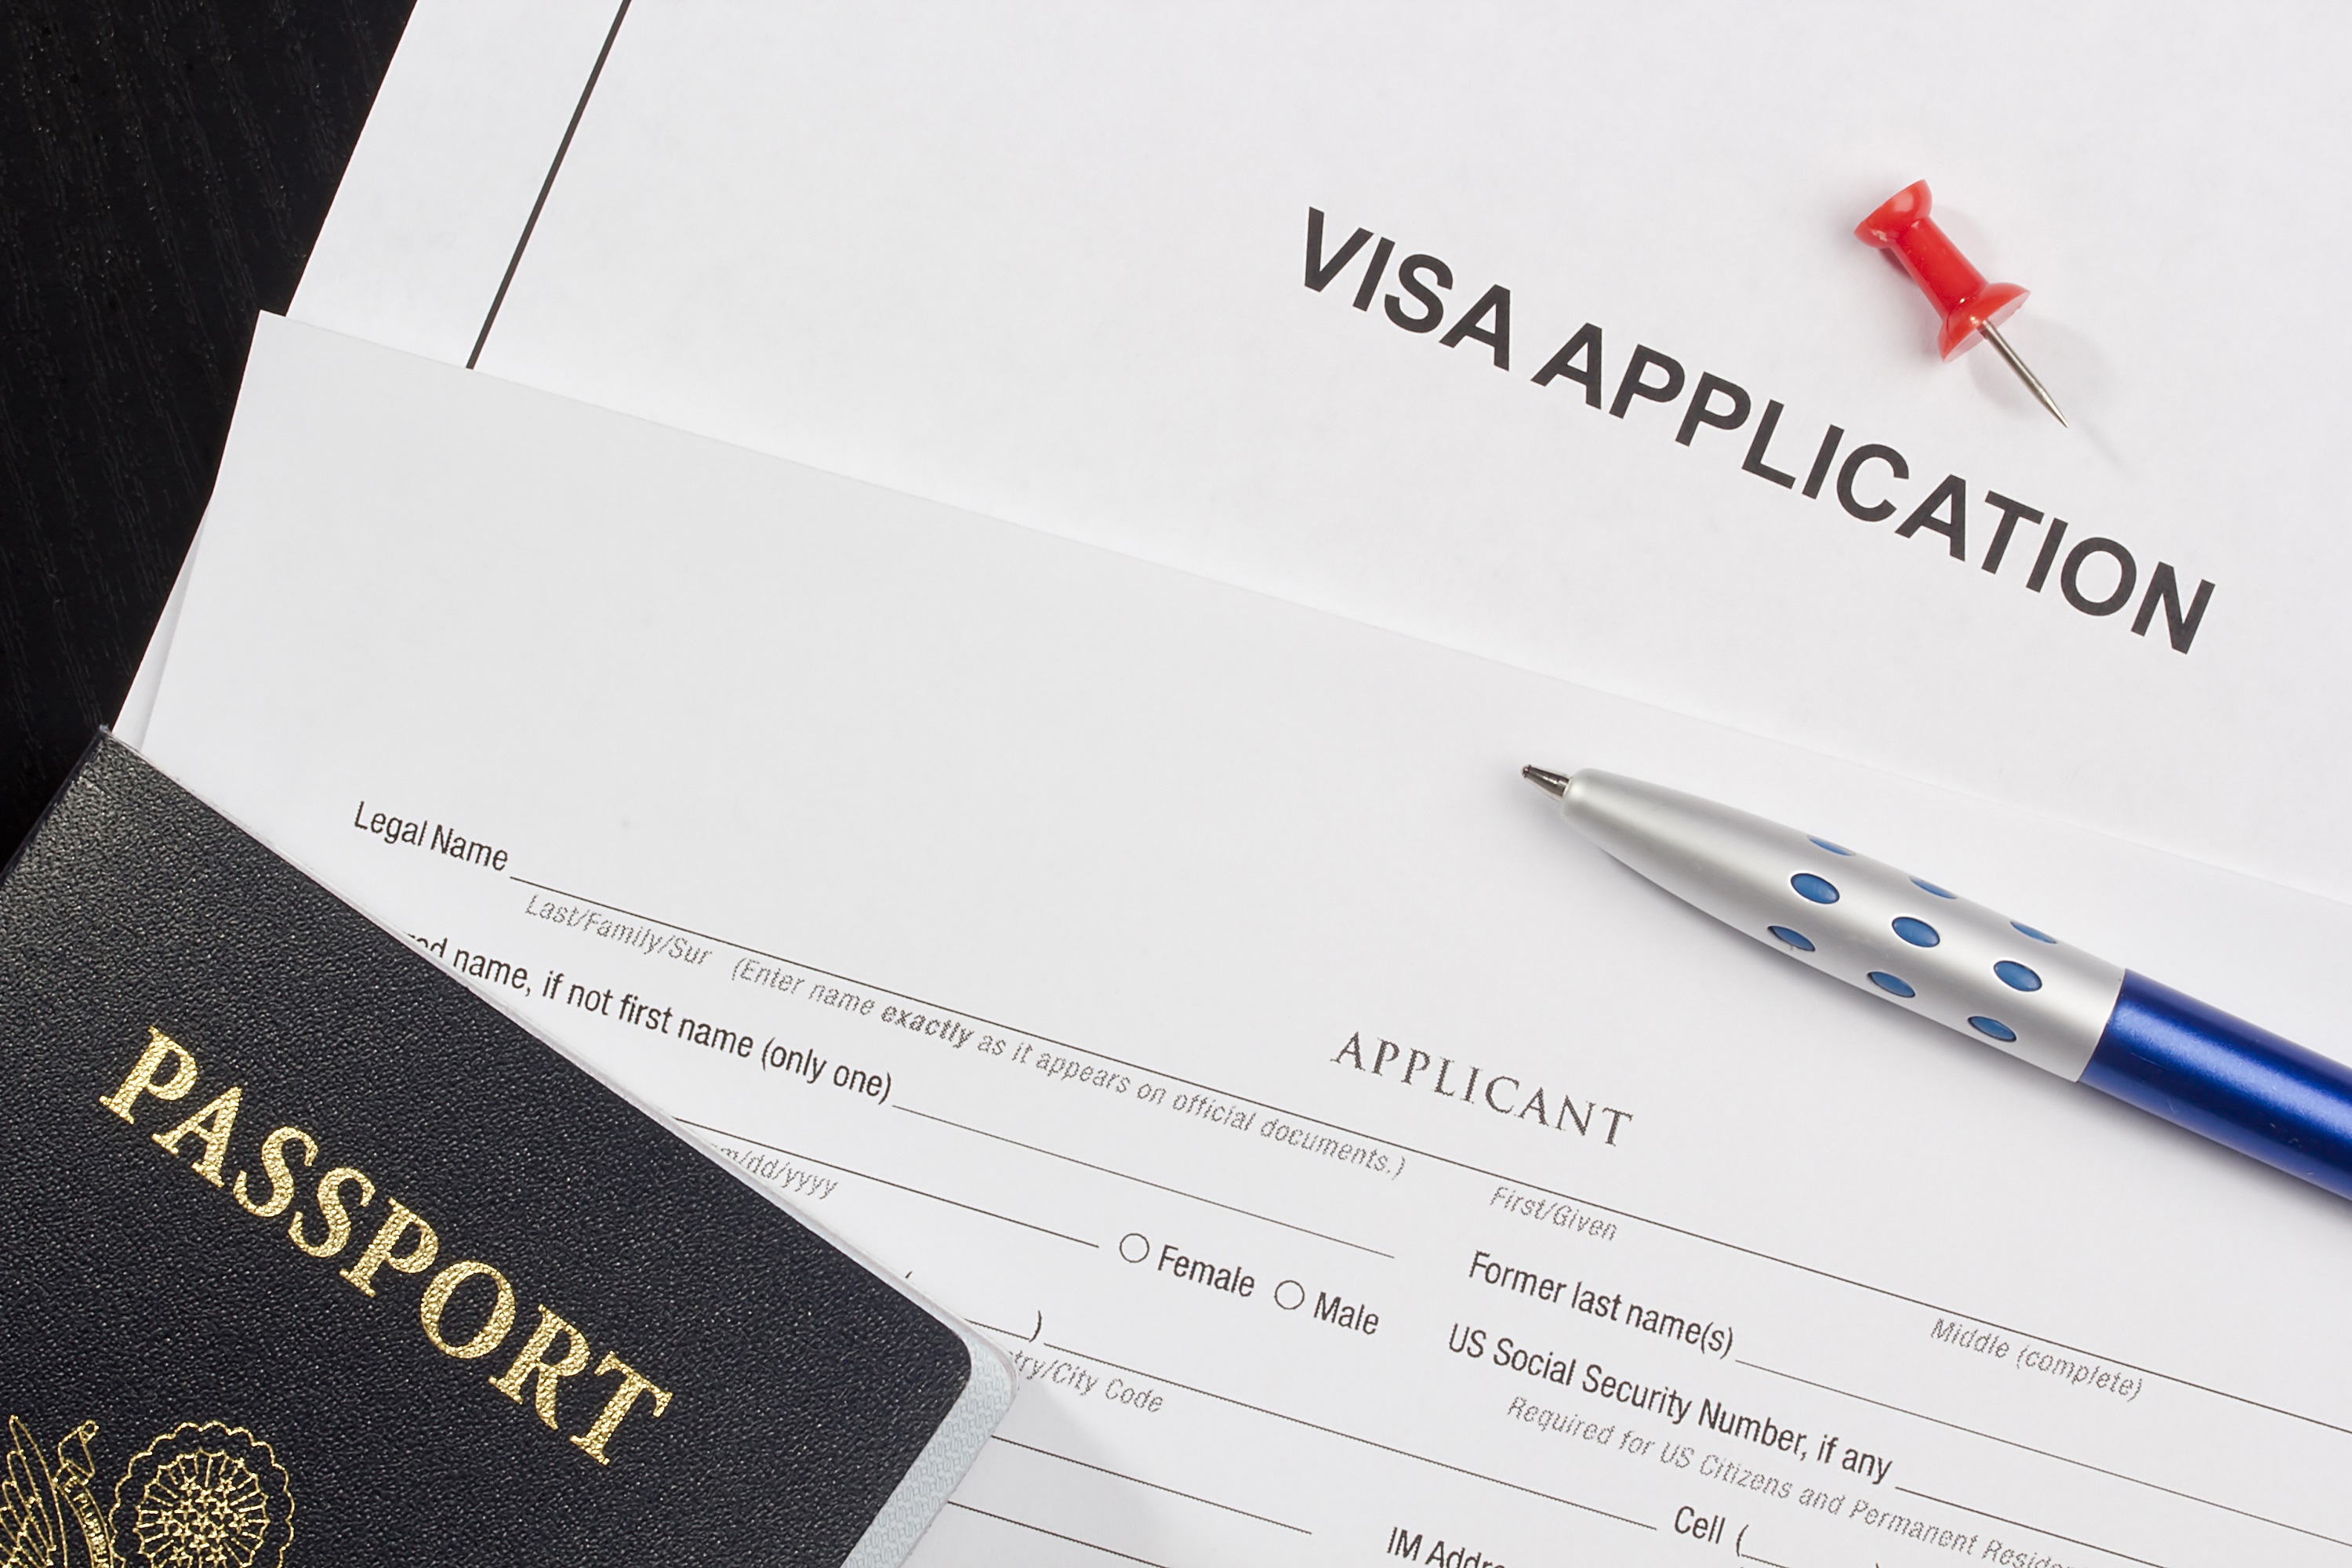 What Are The Documents Required For Temporary Resident Visa Of Canada?